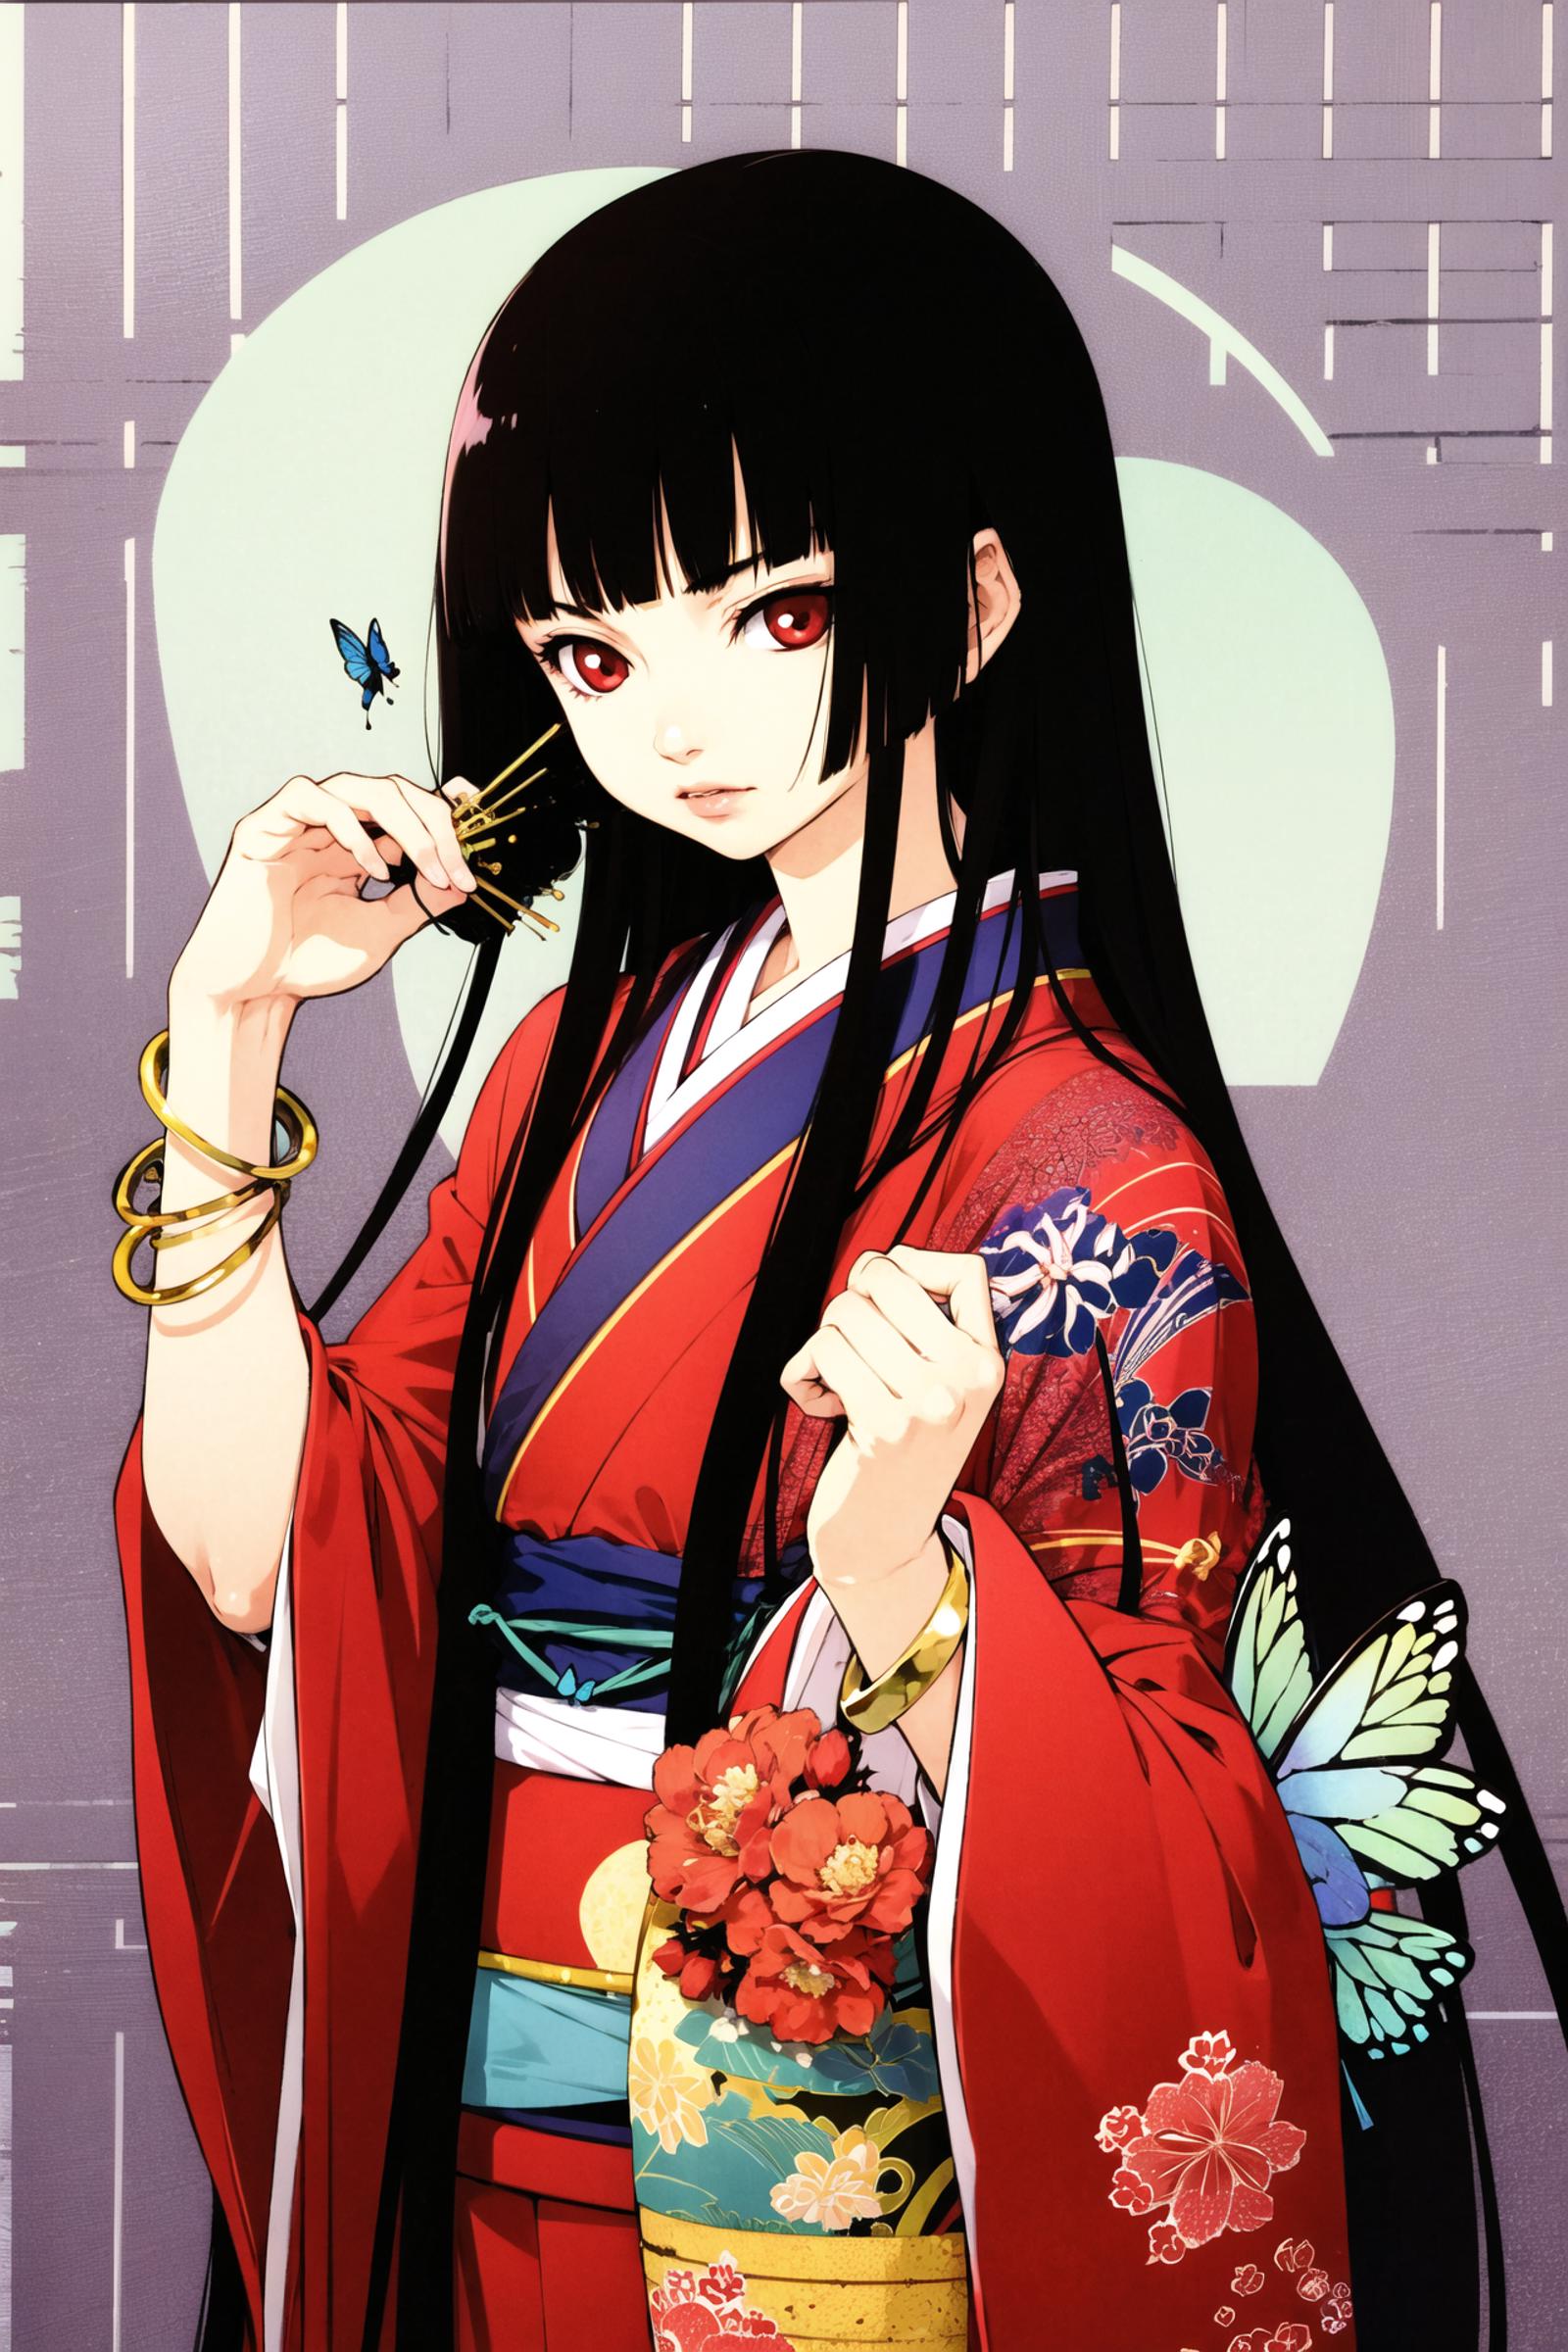 A woman in a kimono with a red flower in her hand and butterflies on her shoulder.